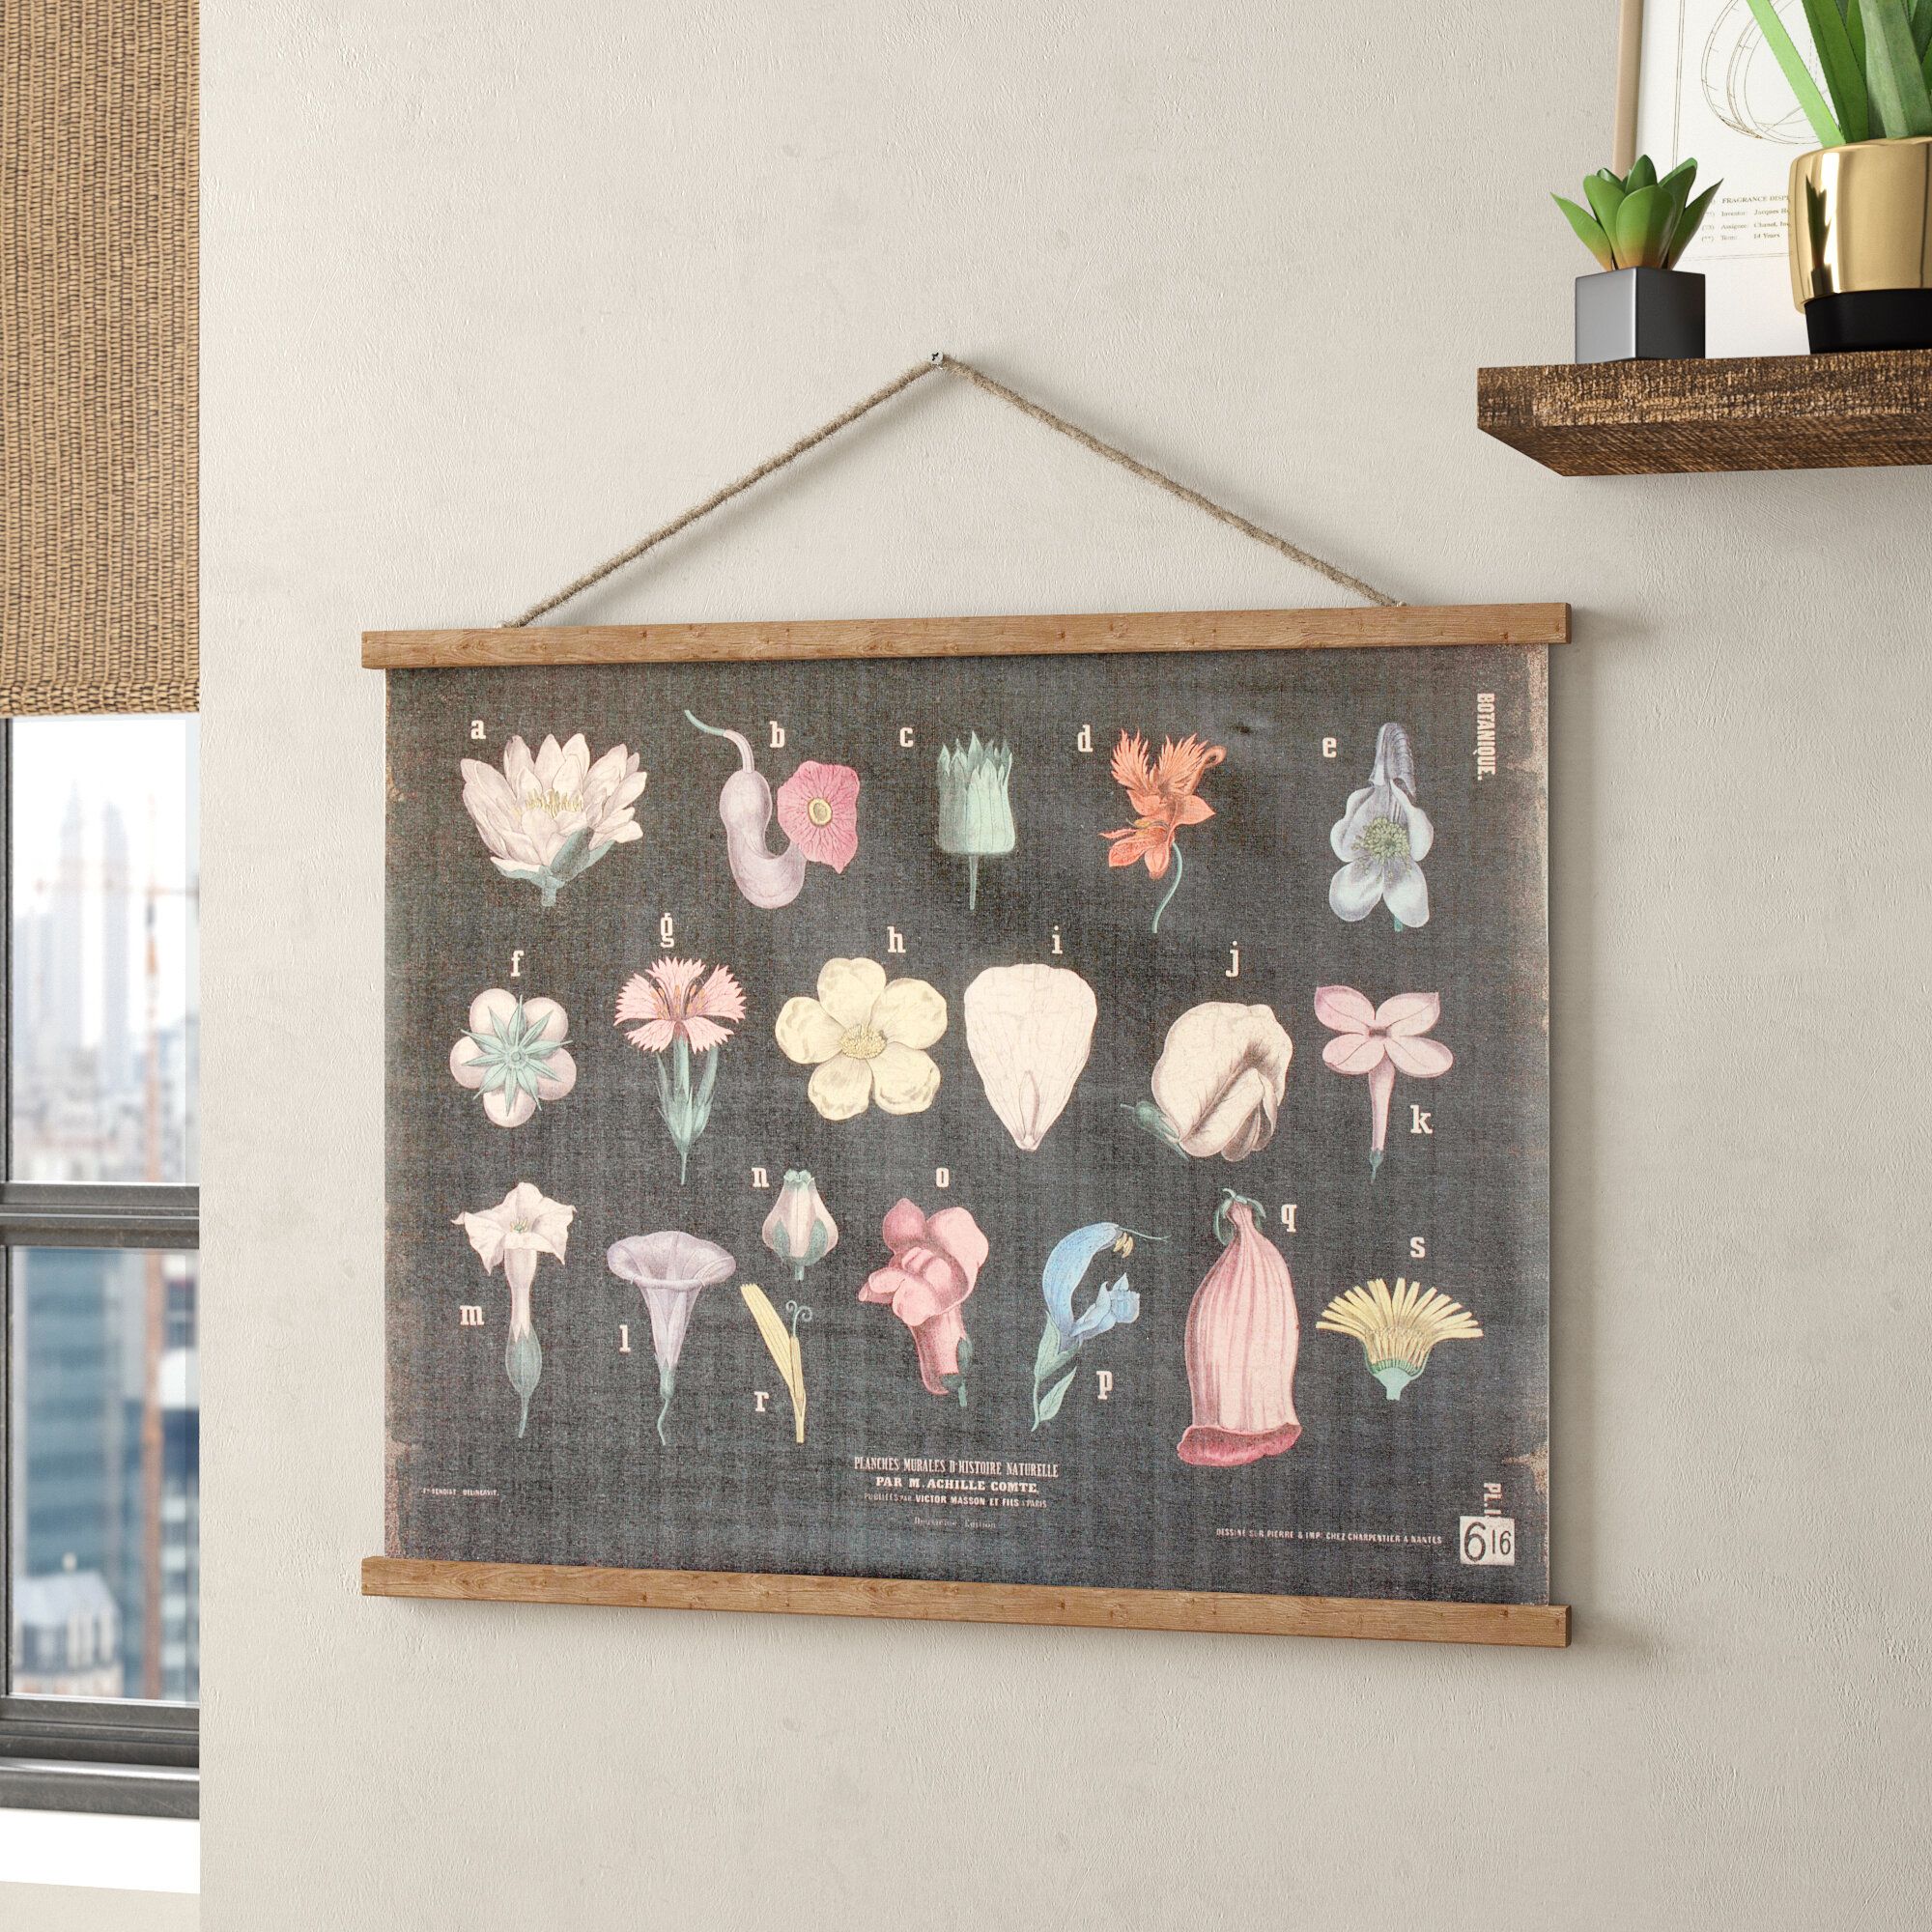 Wayfair | Wall Hanging Tapestries You'll Love In 2021 Inside 2017 Blended Fabric Ranier Wall Hangings With Hanging Accessories Included (Gallery 13 of 20)